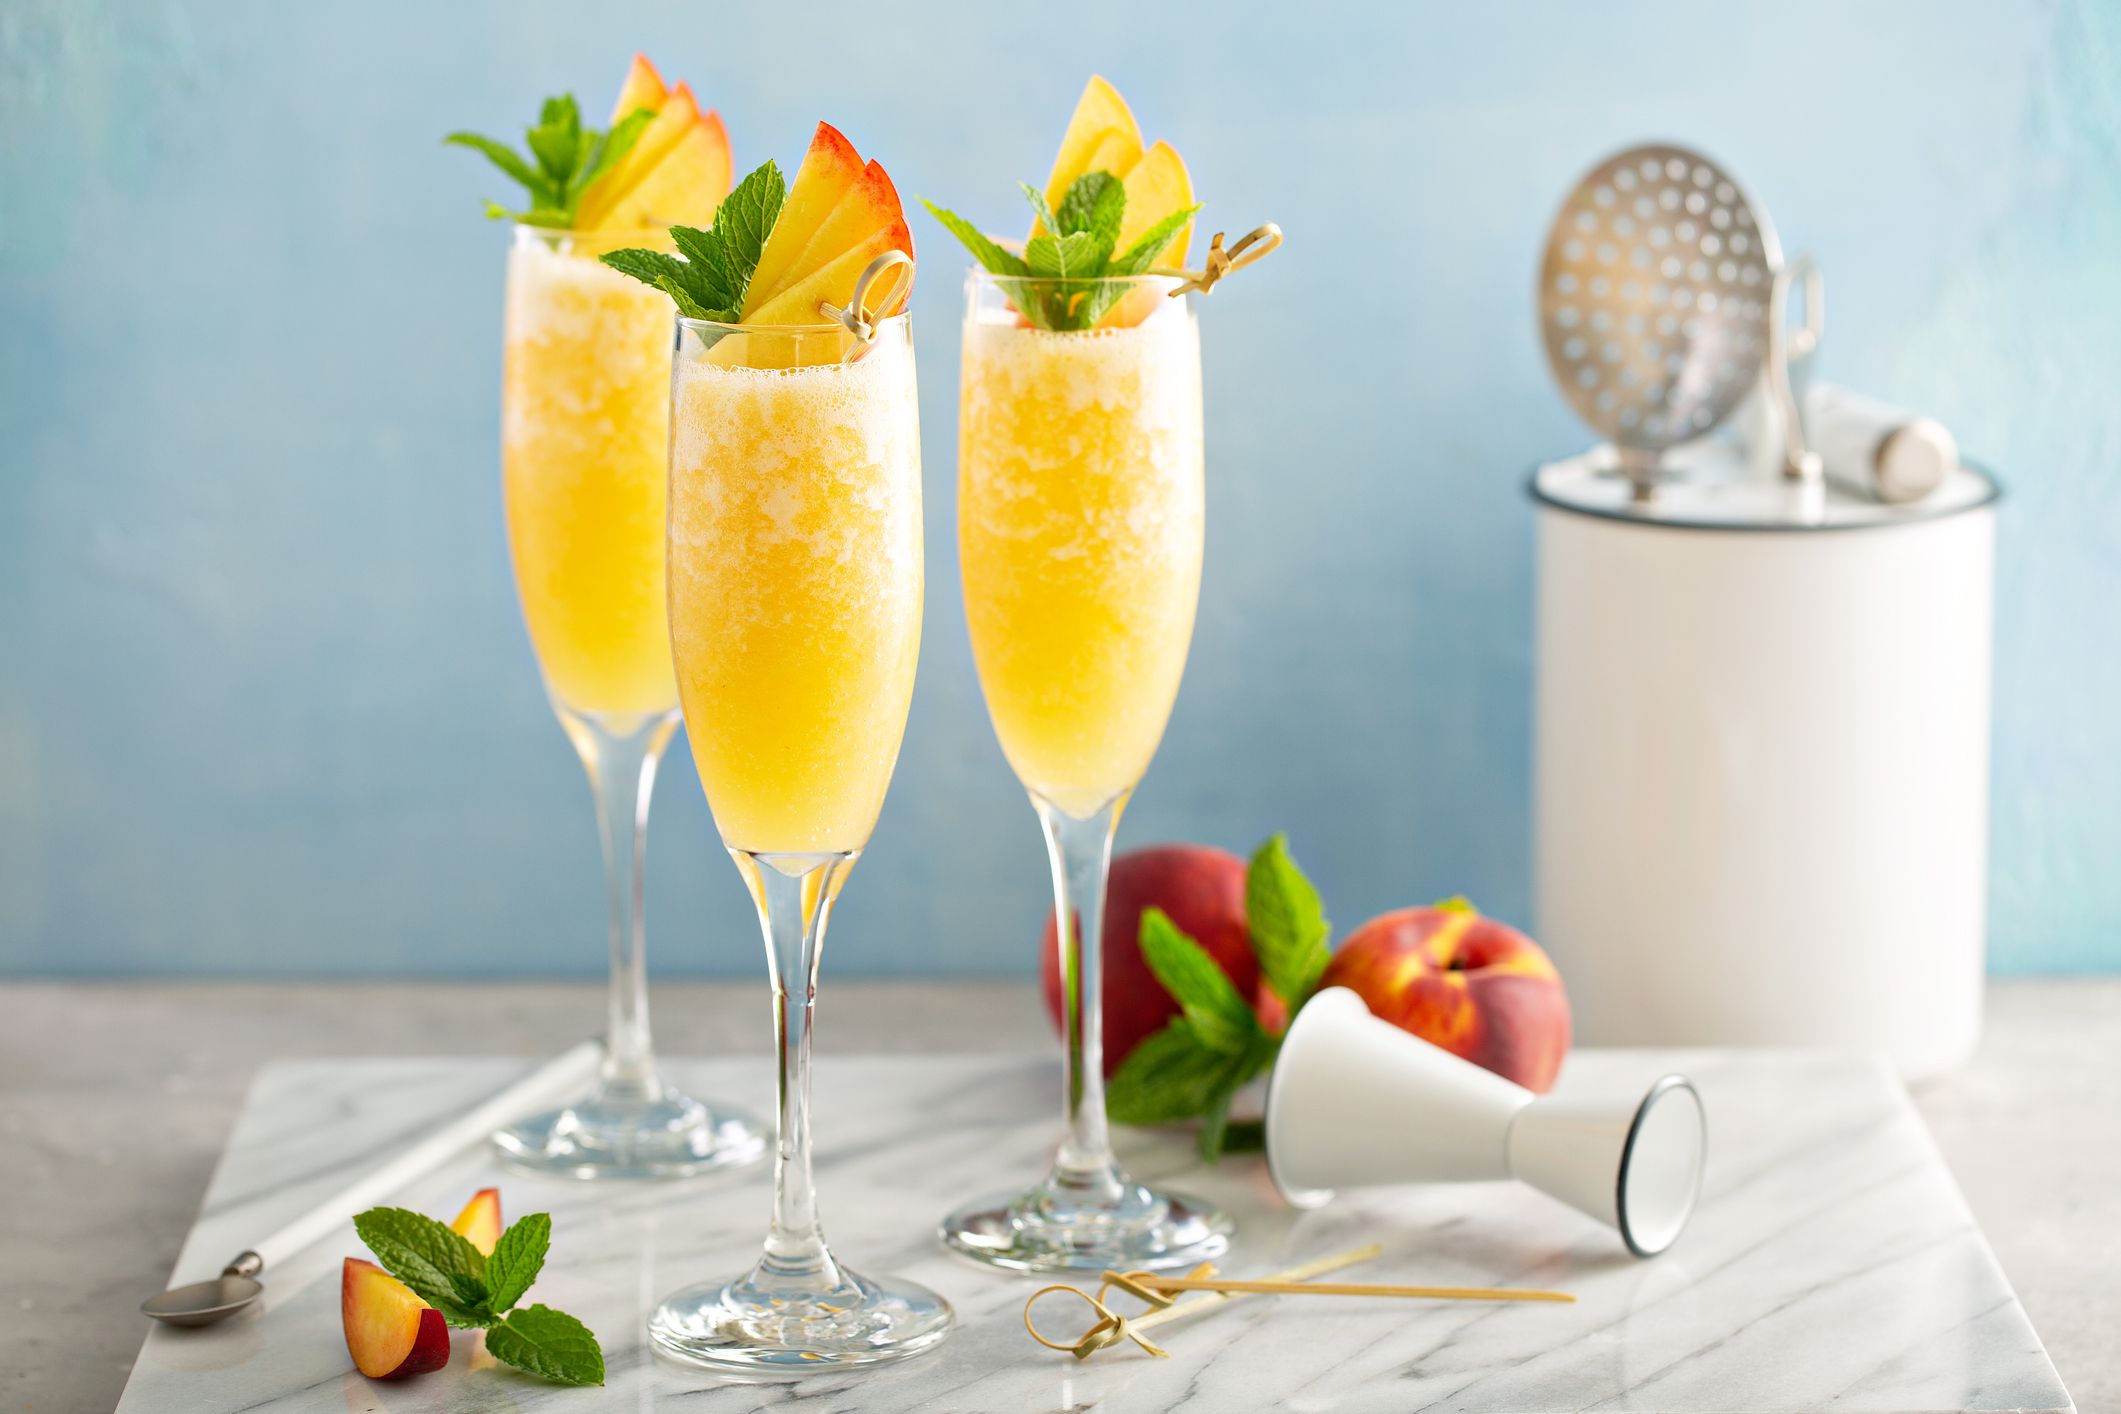 How to Make the Best Mimosa